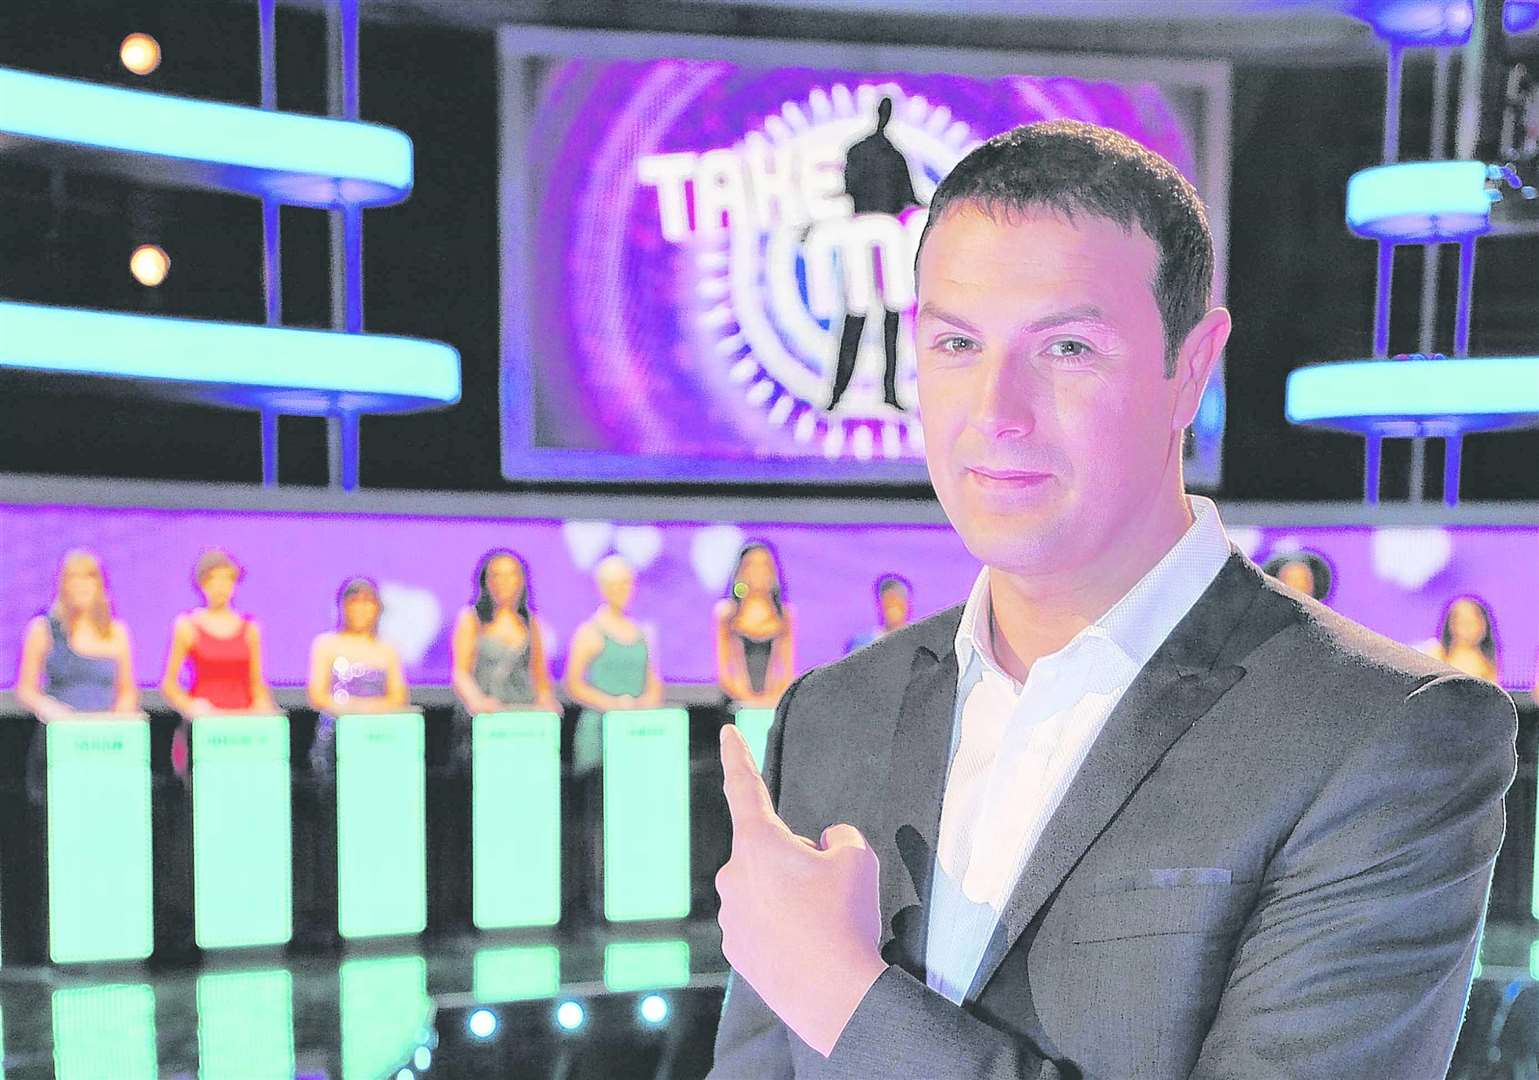 Paddy McGuinness, presenter of Take Me Out, filmed at Maidstone Studios. Credit: Talkback Thames